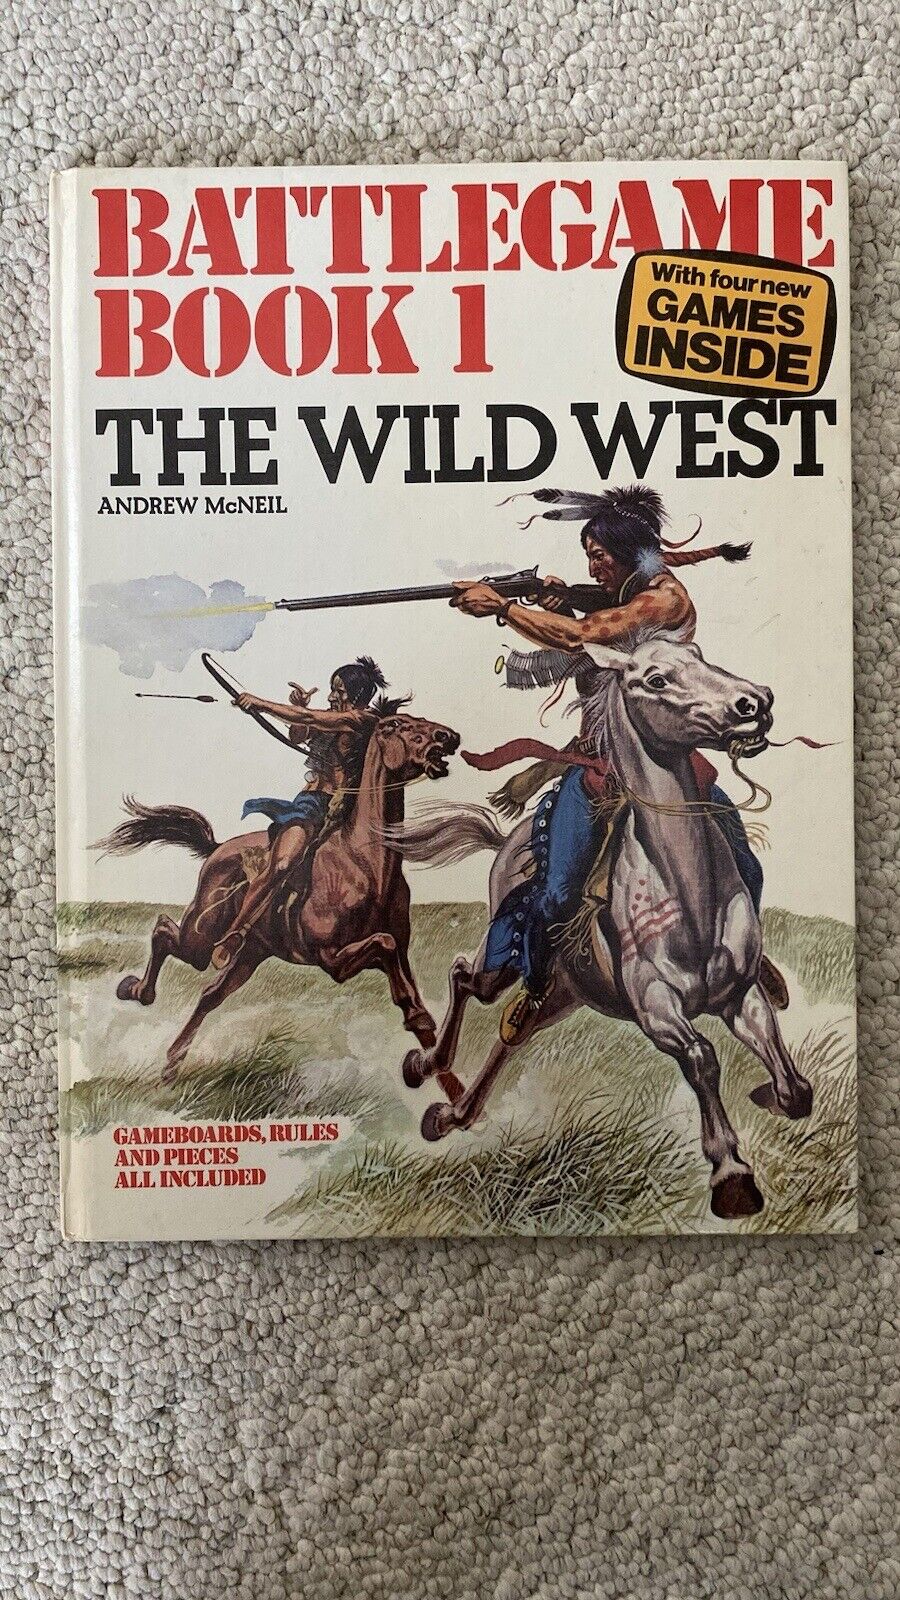 BATTLEGAME BOOK 1 The Wild West Wargaming 1975 Andrew McNeil Hardcover Complete